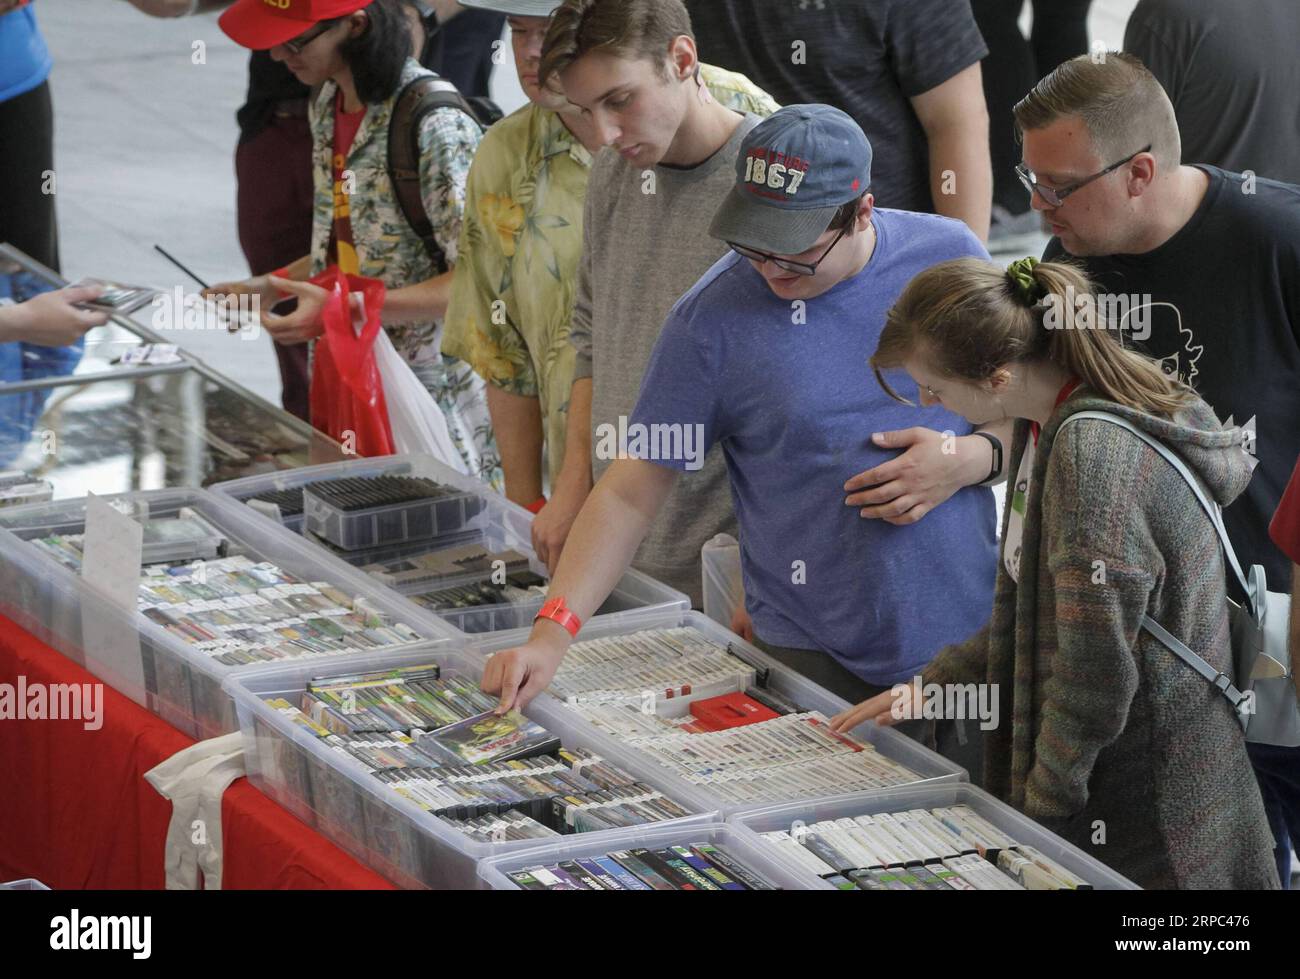 (190622) -- VANCOUVER, June 22, 2019 -- People visit the Vancouver Retro Gaming Expo in New Westminster, Canada, June 22, 2019. The Vancouver Retro Gaming Expo was held at the Anvil Centre on Saturday, offering different collections of video games, consoles and collectibles from 1970s to 1990s. ) CANADA-NEW WESTMINSTER-RETRO GAMING EXPO LiangxSen PUBLICATIONxNOTxINxCHN Stock Photo